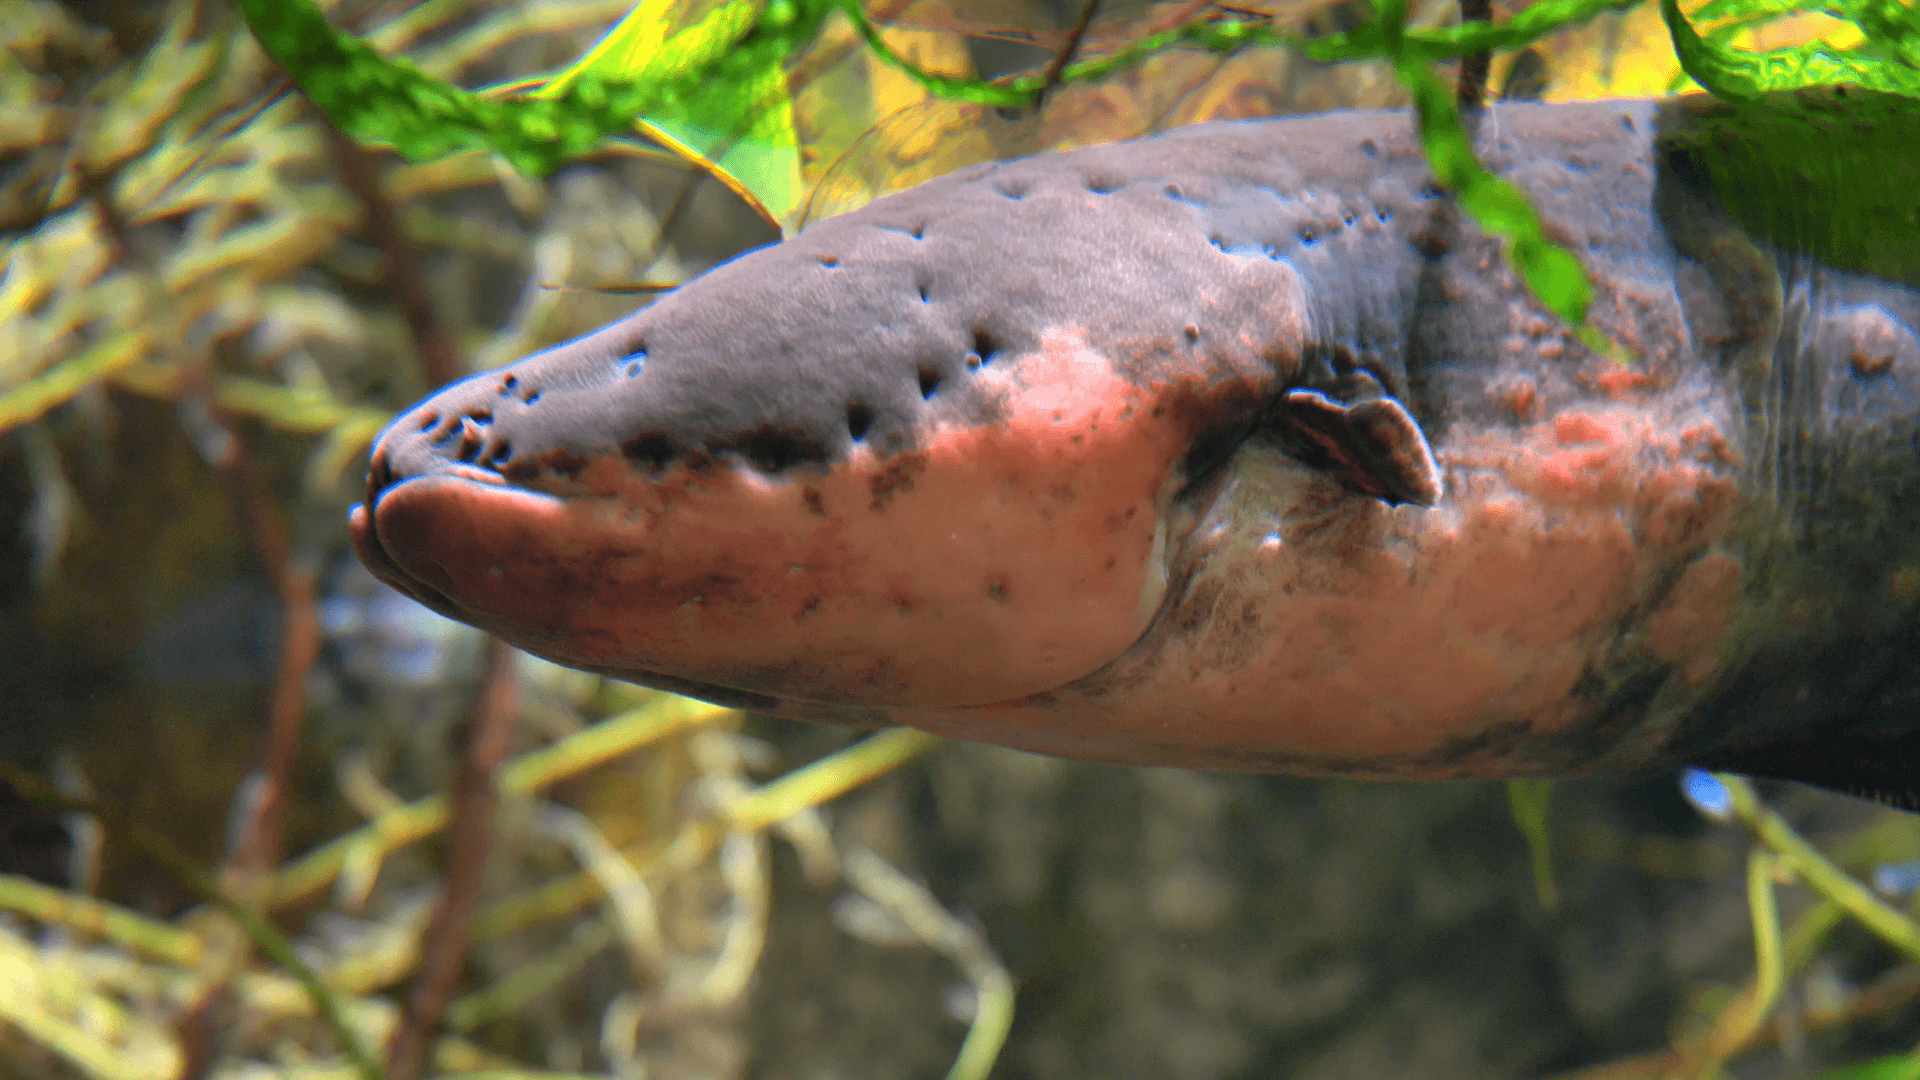 A photo of Electric eel